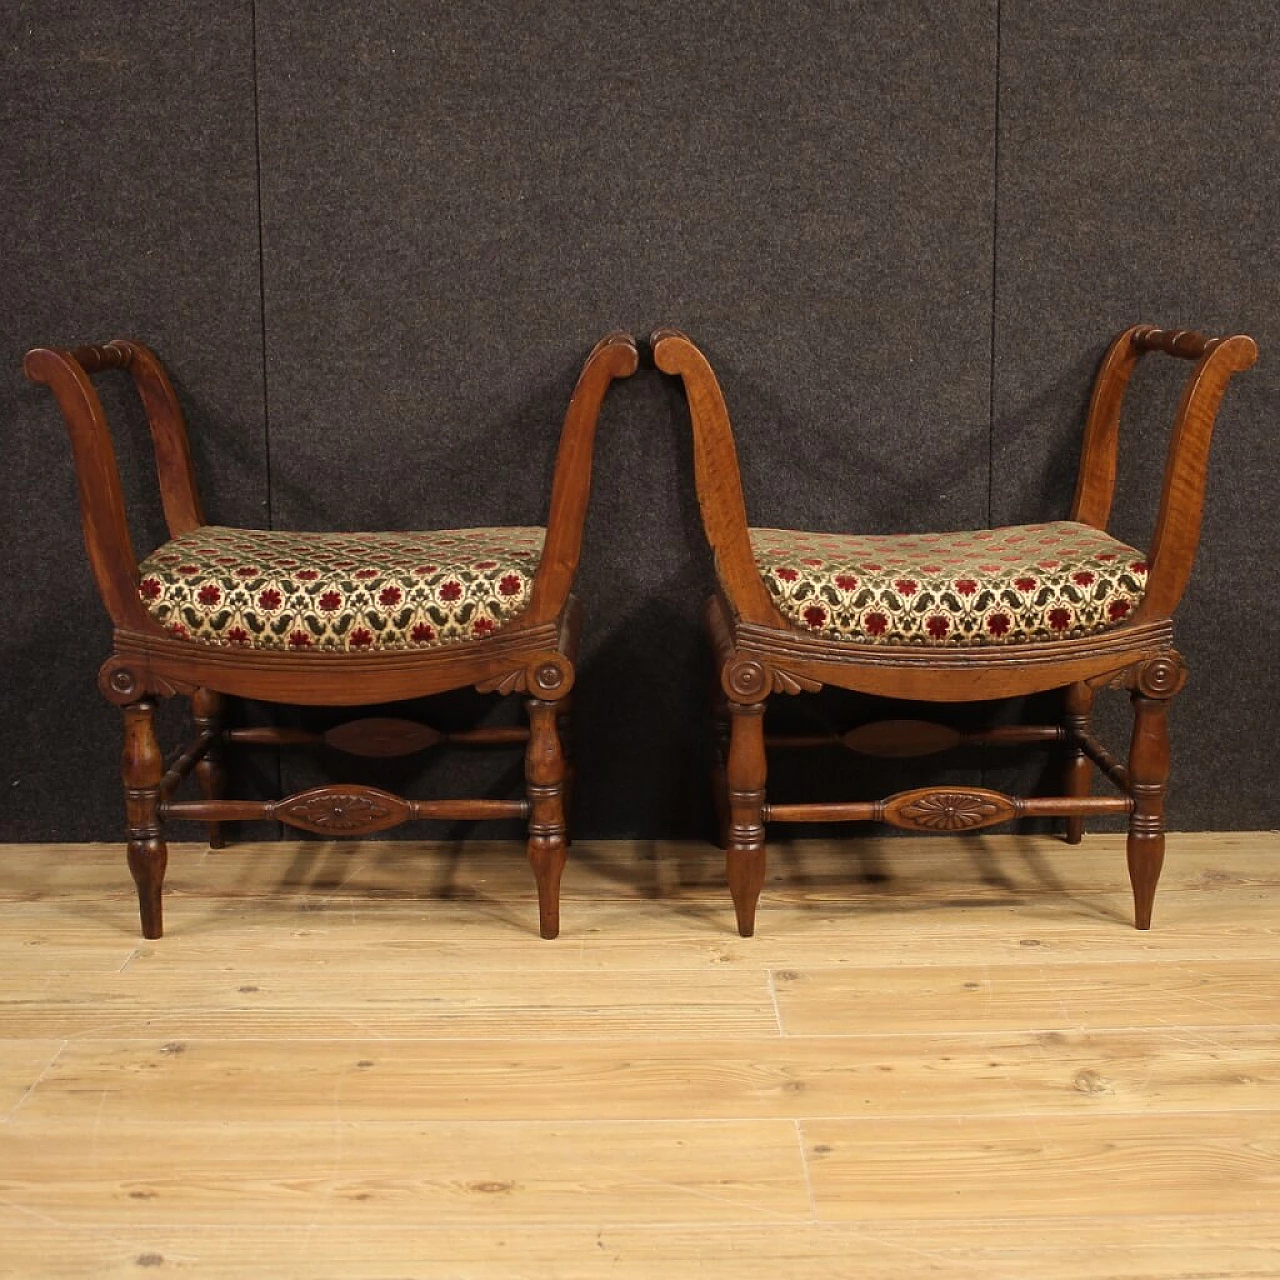 Pair of Charles X benches in carved walnut and floral fabric, 19th century 1116101